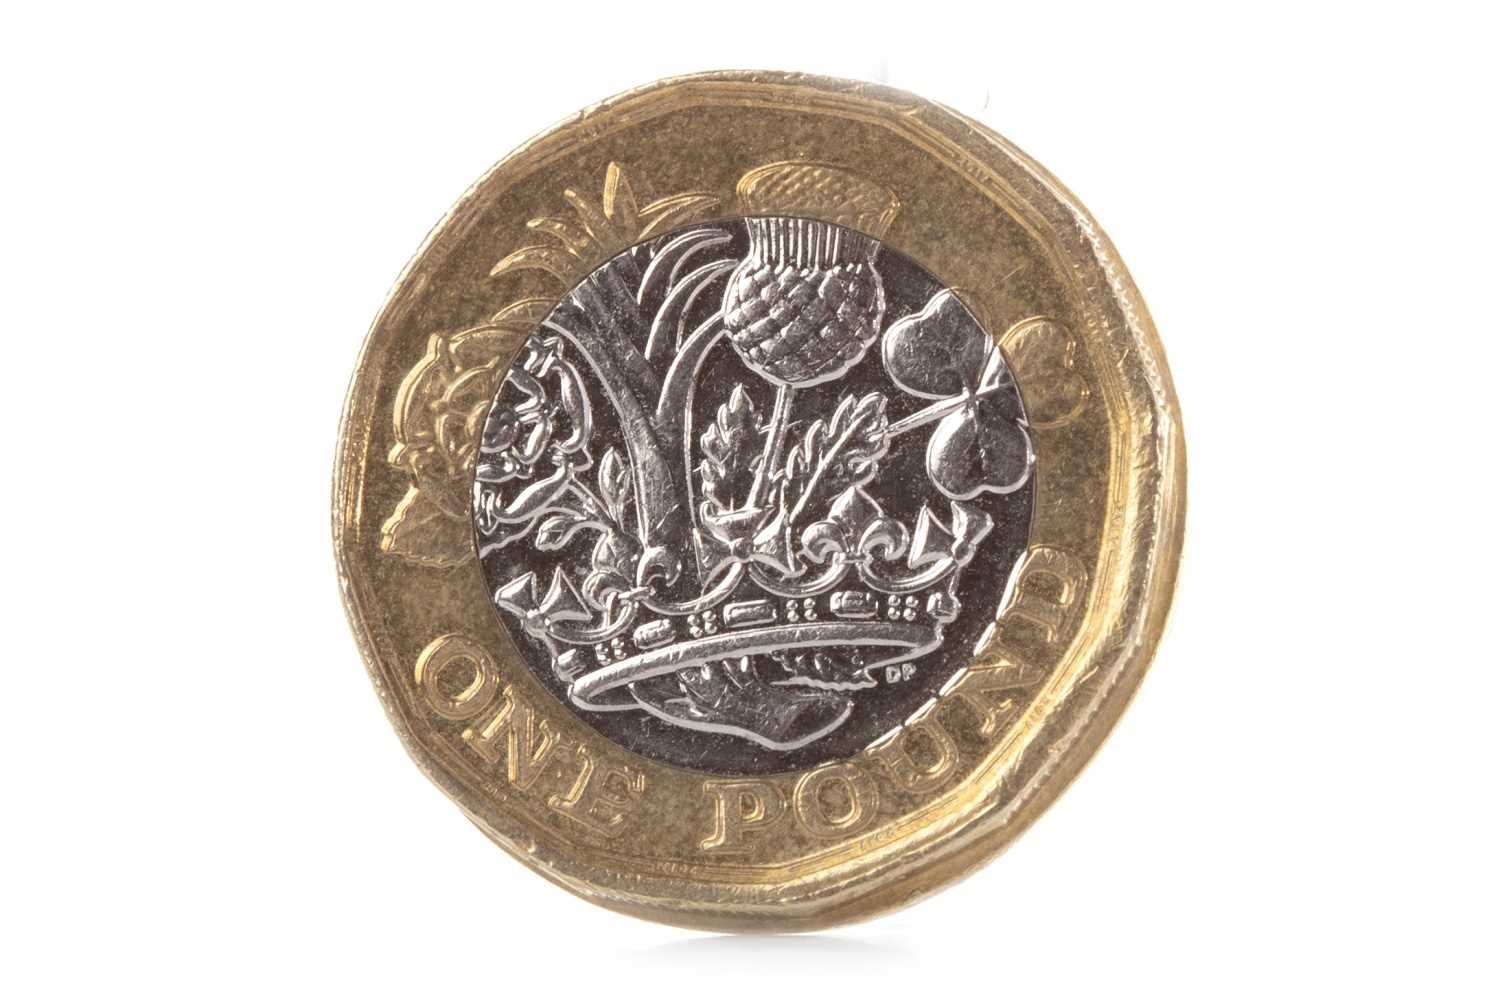 Lot 600 - A MISTRIKE £1 ONE POUND COIN DATED 2017